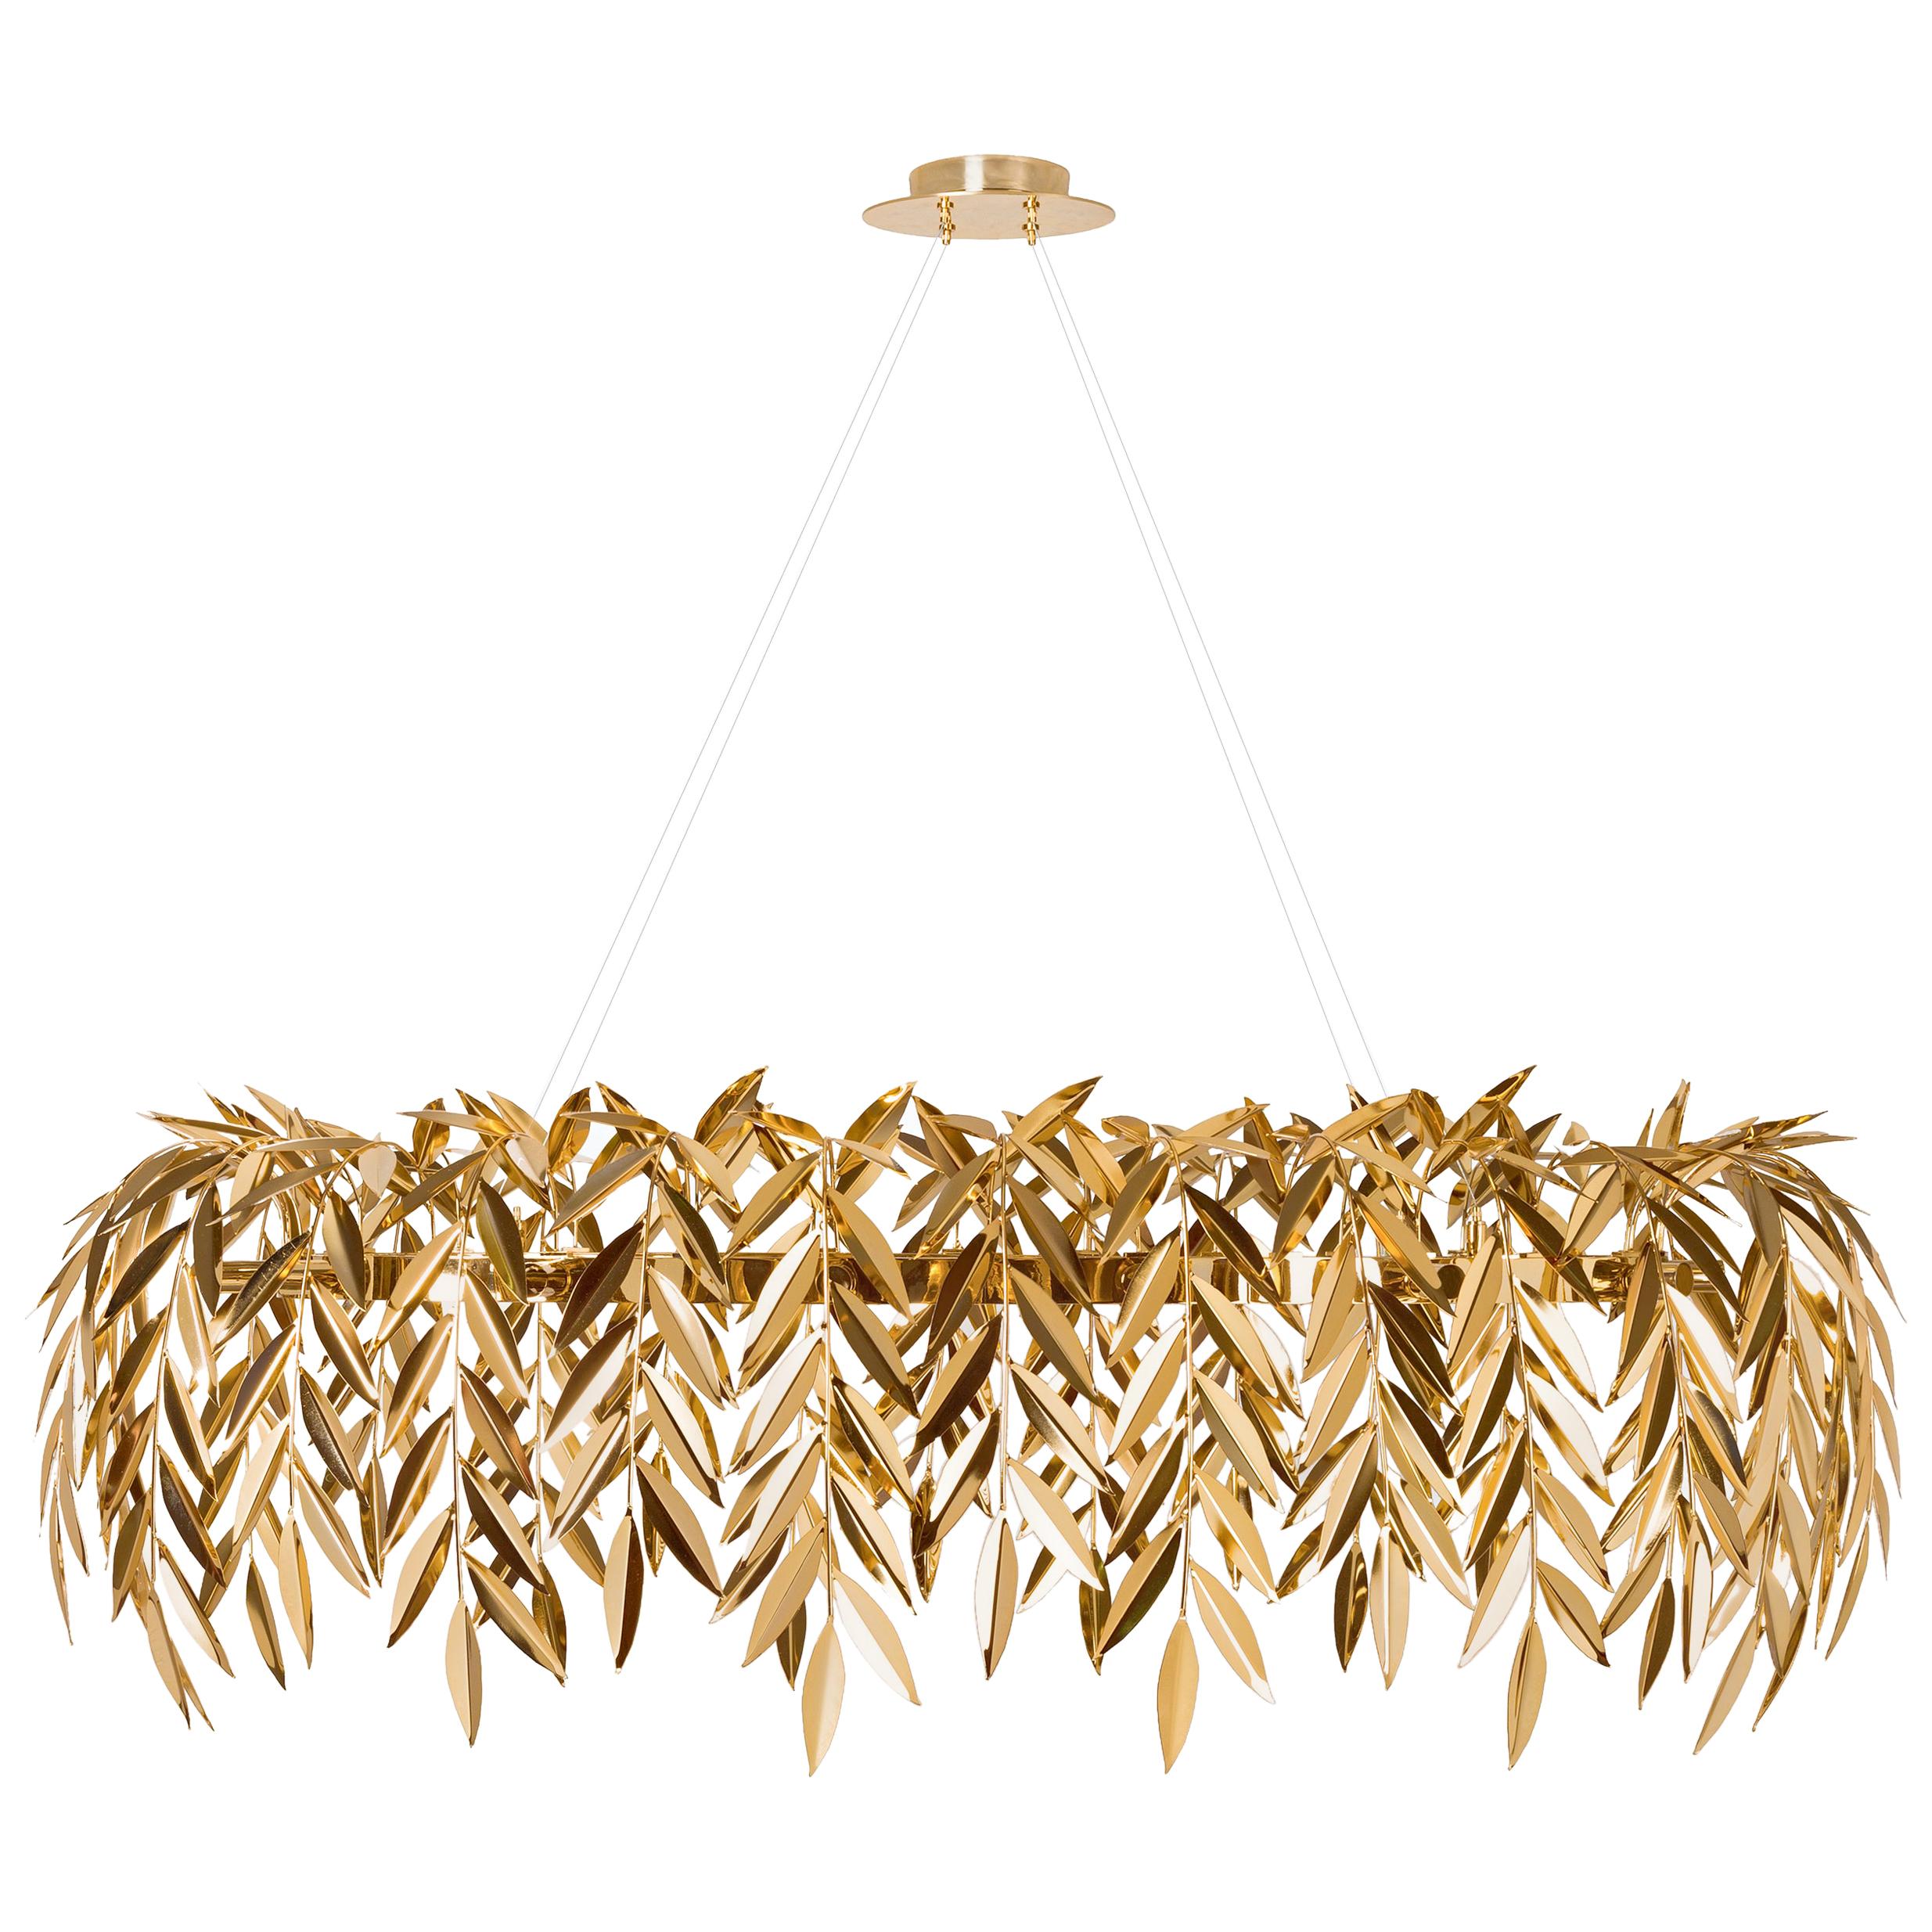 Azores Chandelier, Polished Gold, InsidherLand by Joana Santos Barbosa